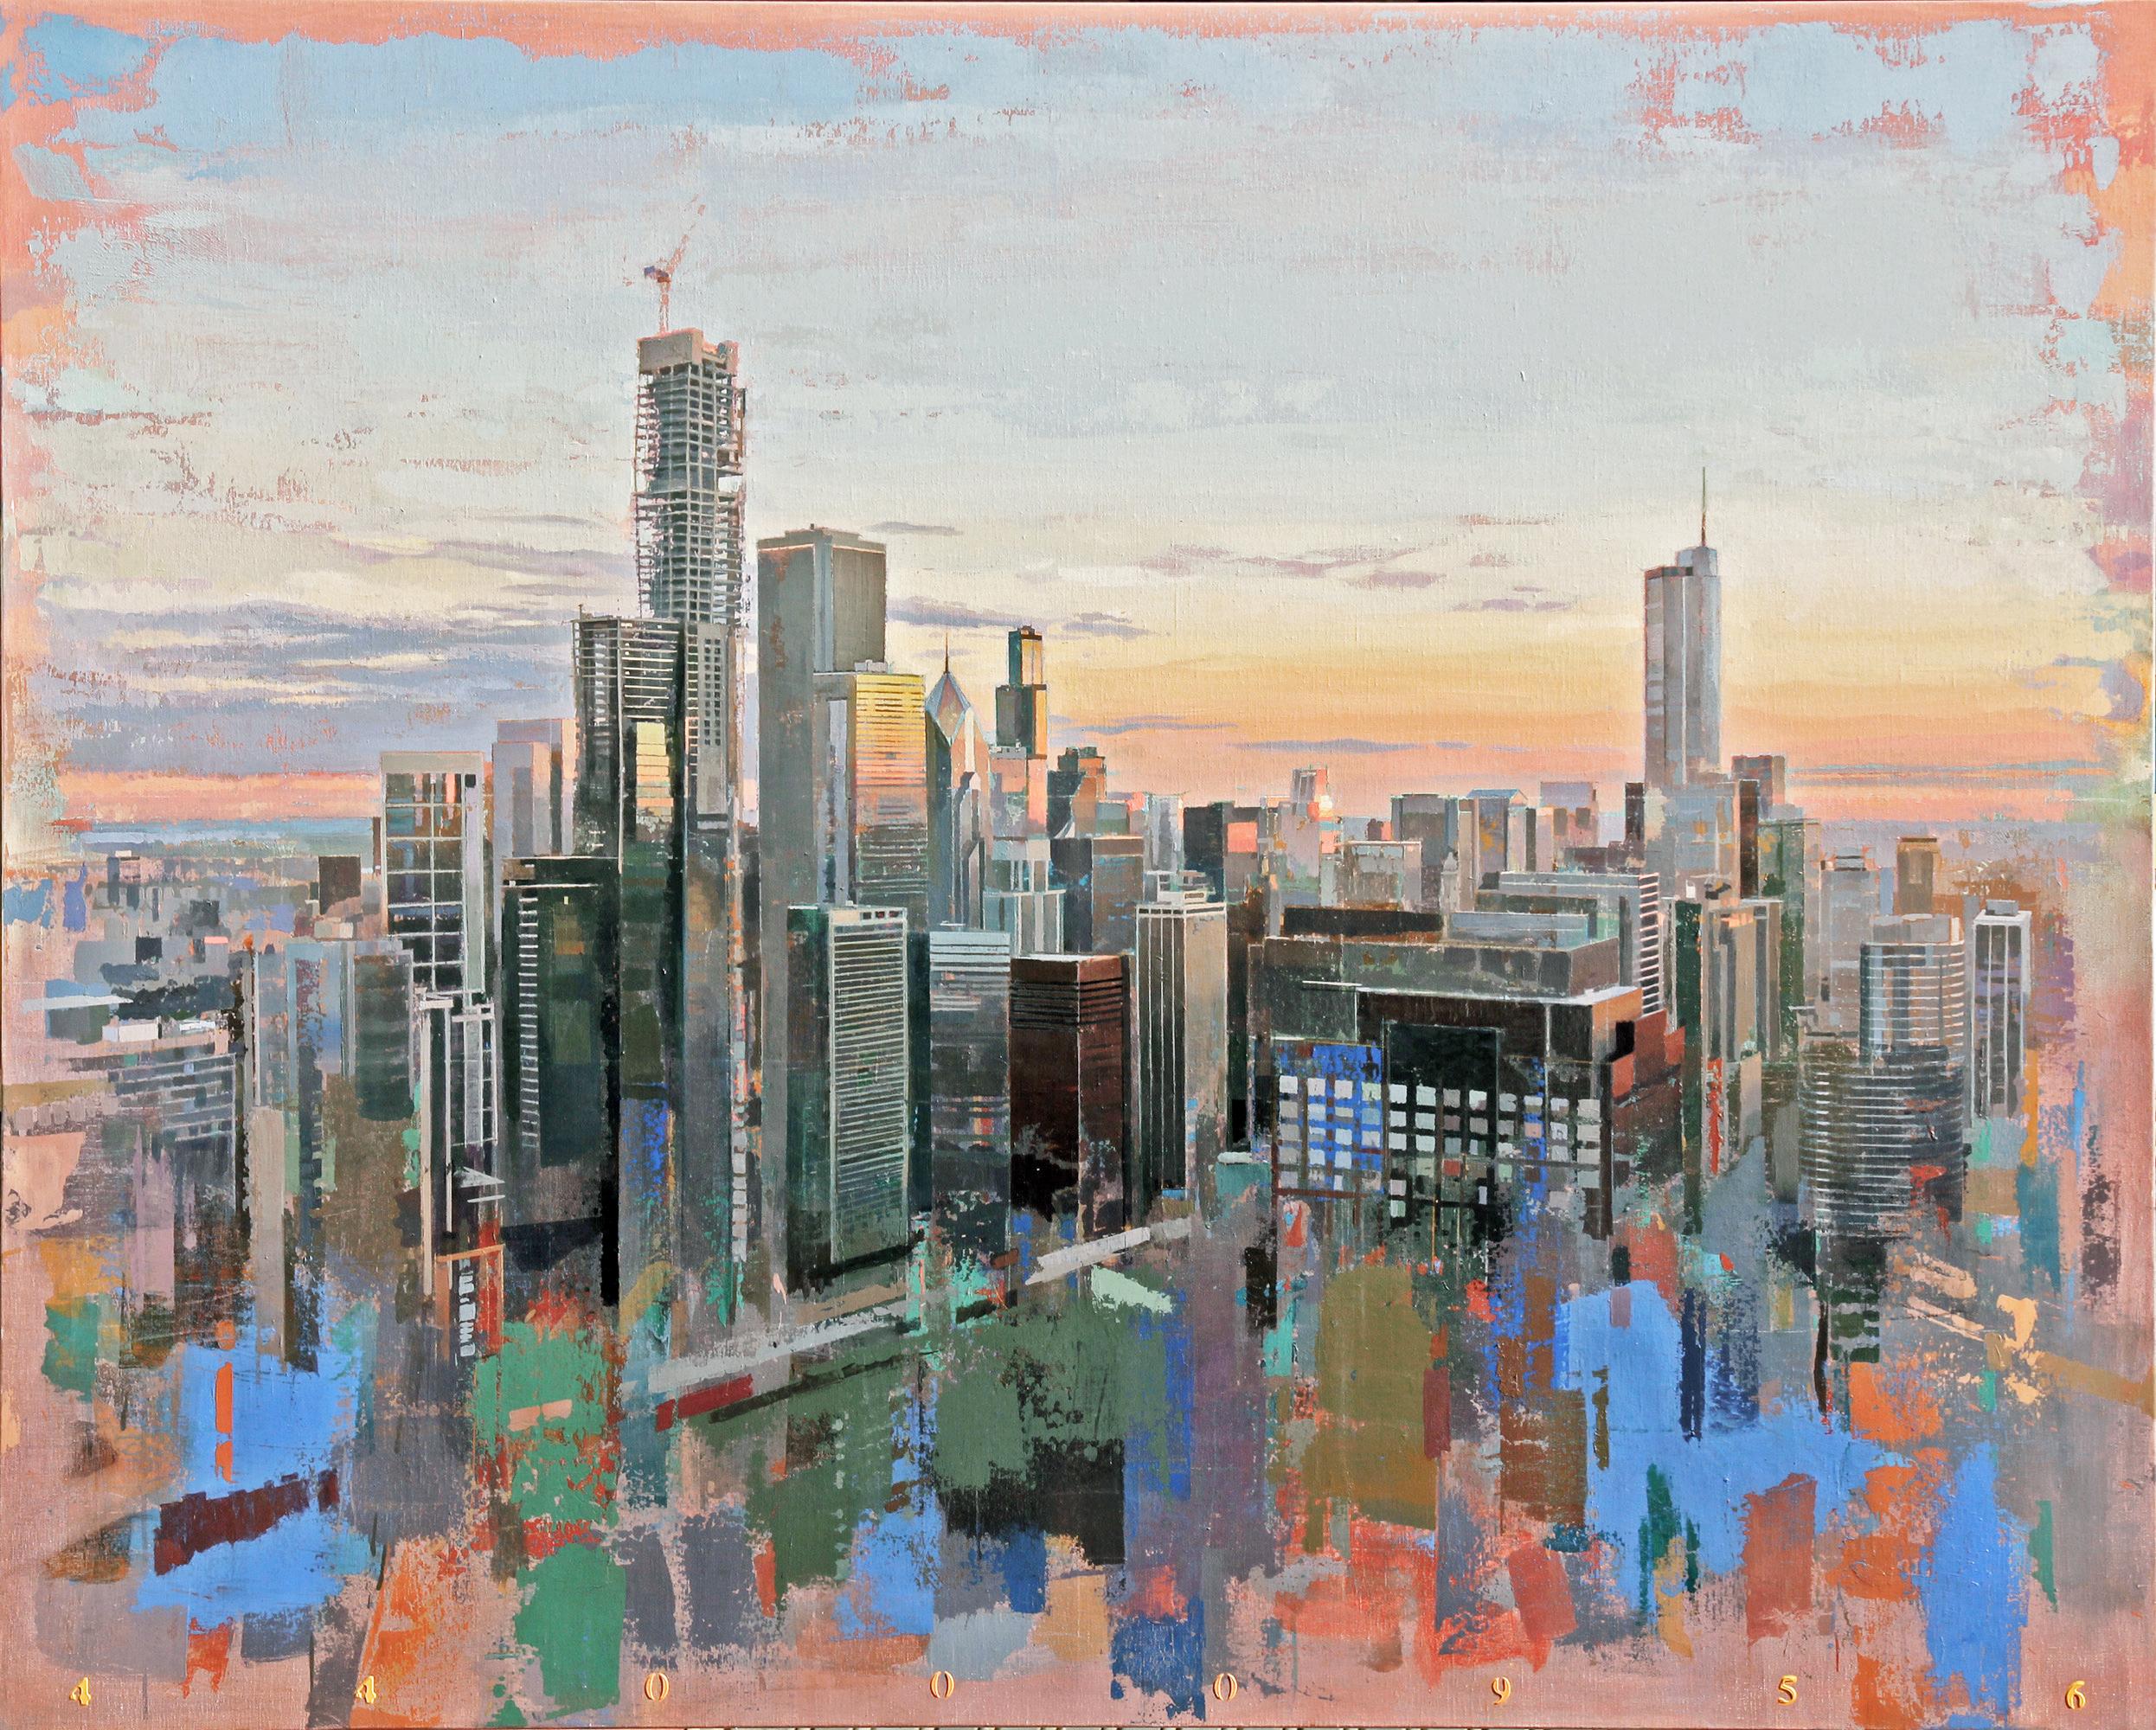 Albert Vidal Moreno Abstract Painting - From Lake Point Towers, Birds Eye View of Chicago Looking East, Oil & Acrylic